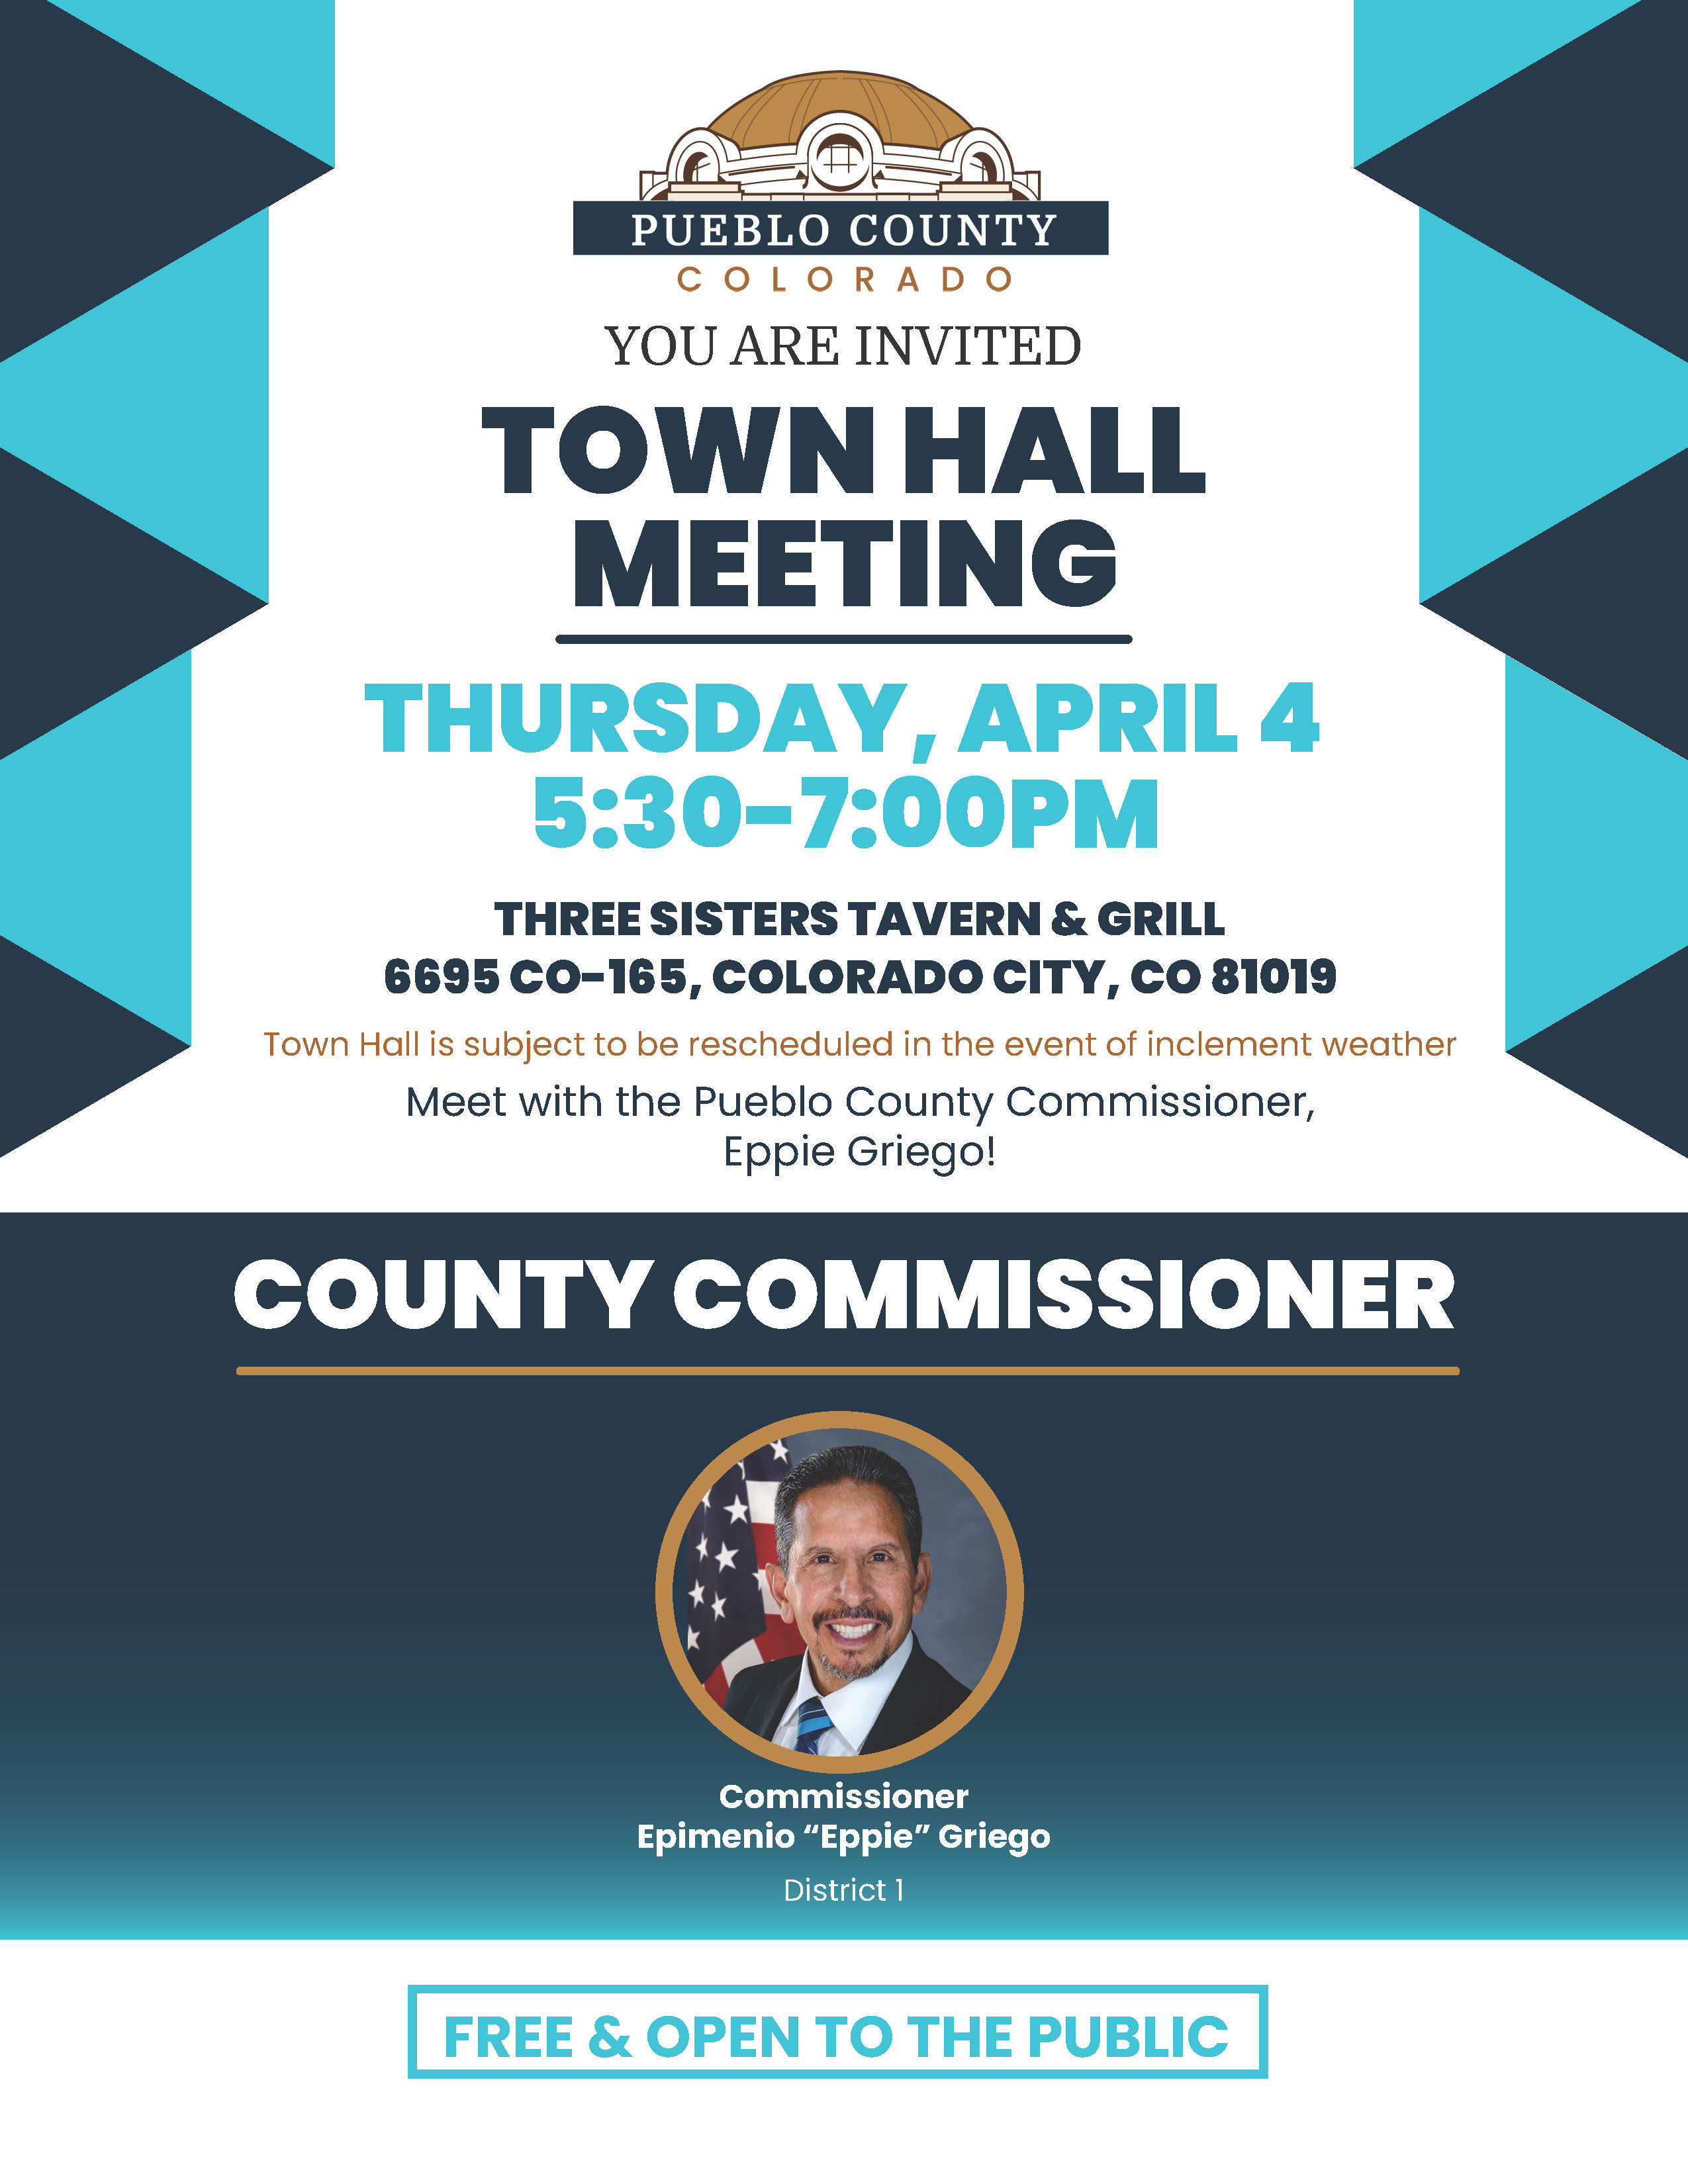 Town Hall Meeting. Thursday, April 4 5:30-7pm. 6695 CO-165, Colorado City, 81019. Meet with Pueblo County Commissioner Eppie Griego! Free and open to the public.